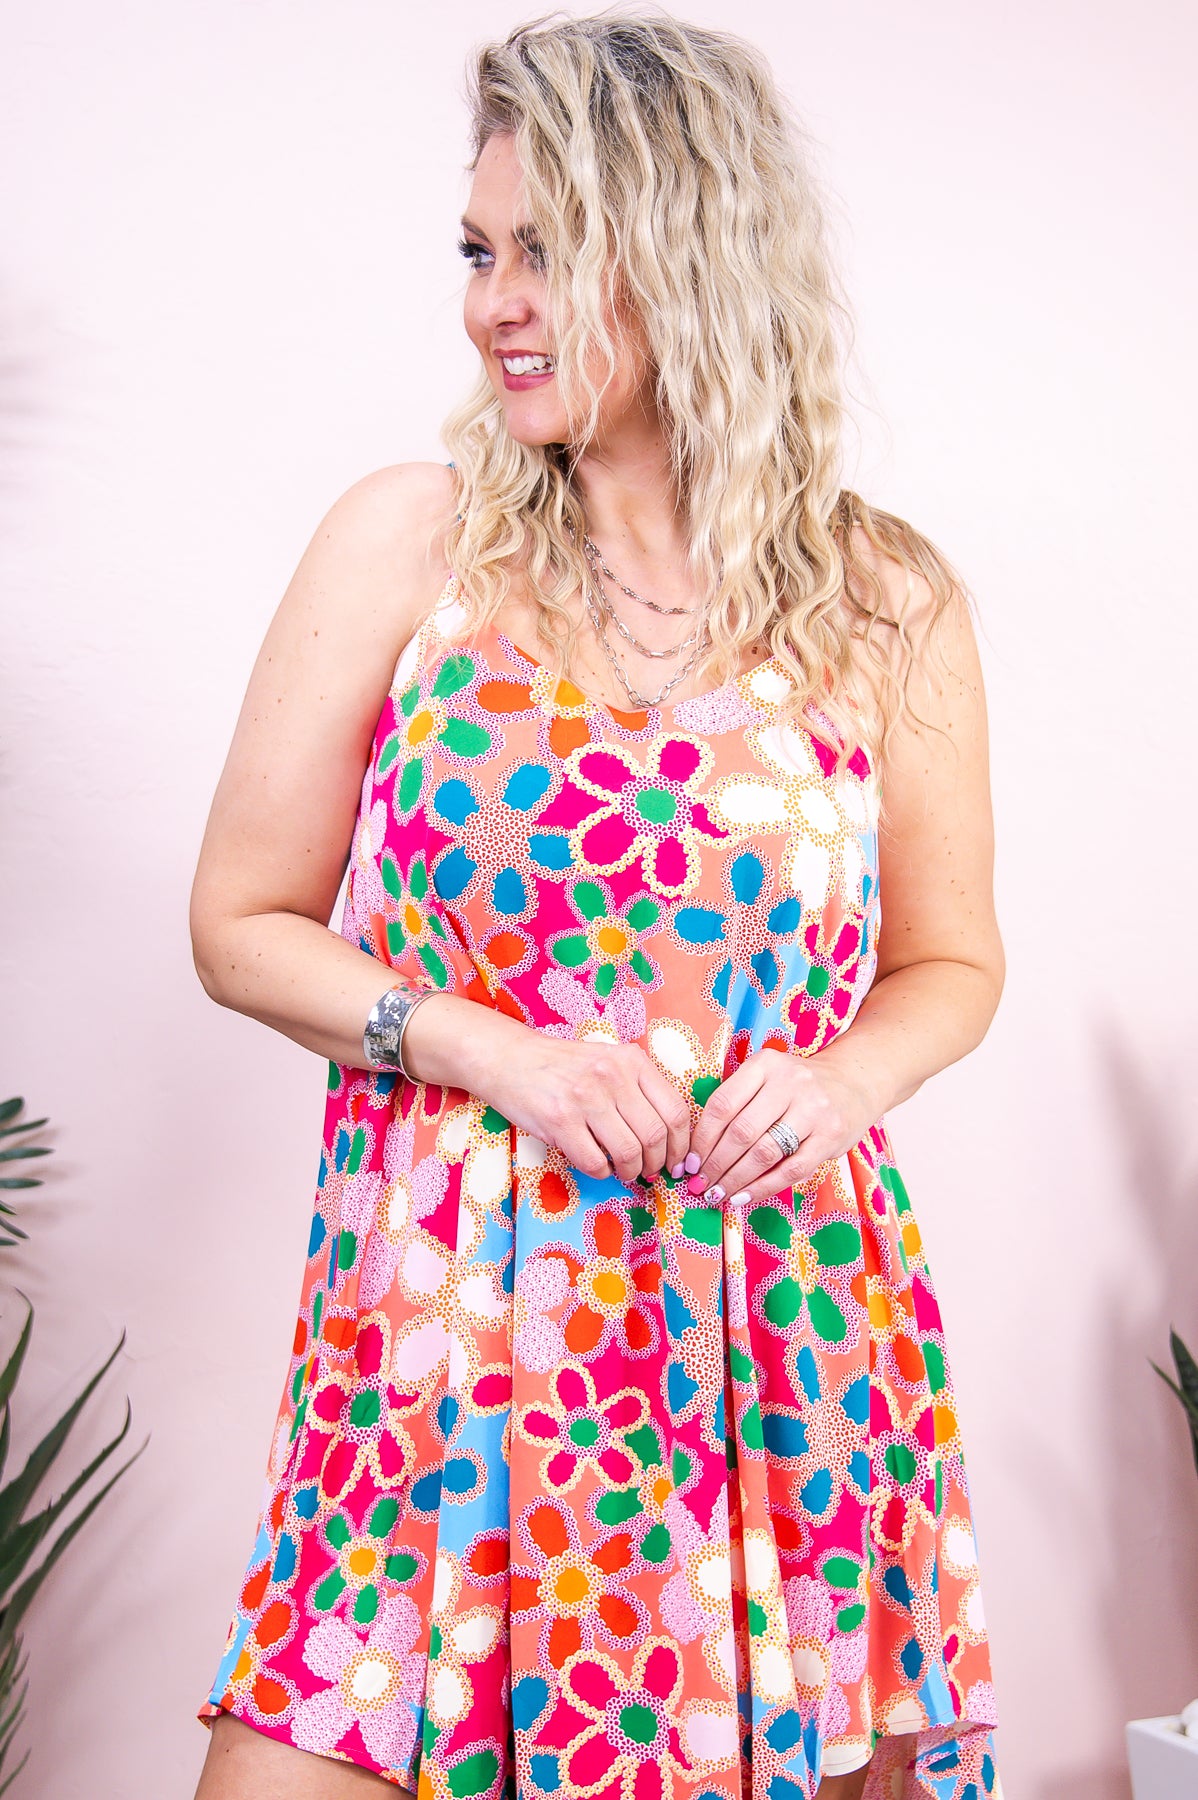 Dreaming Of Vacation Pink/Multi Color Floral Dress - D5147PK